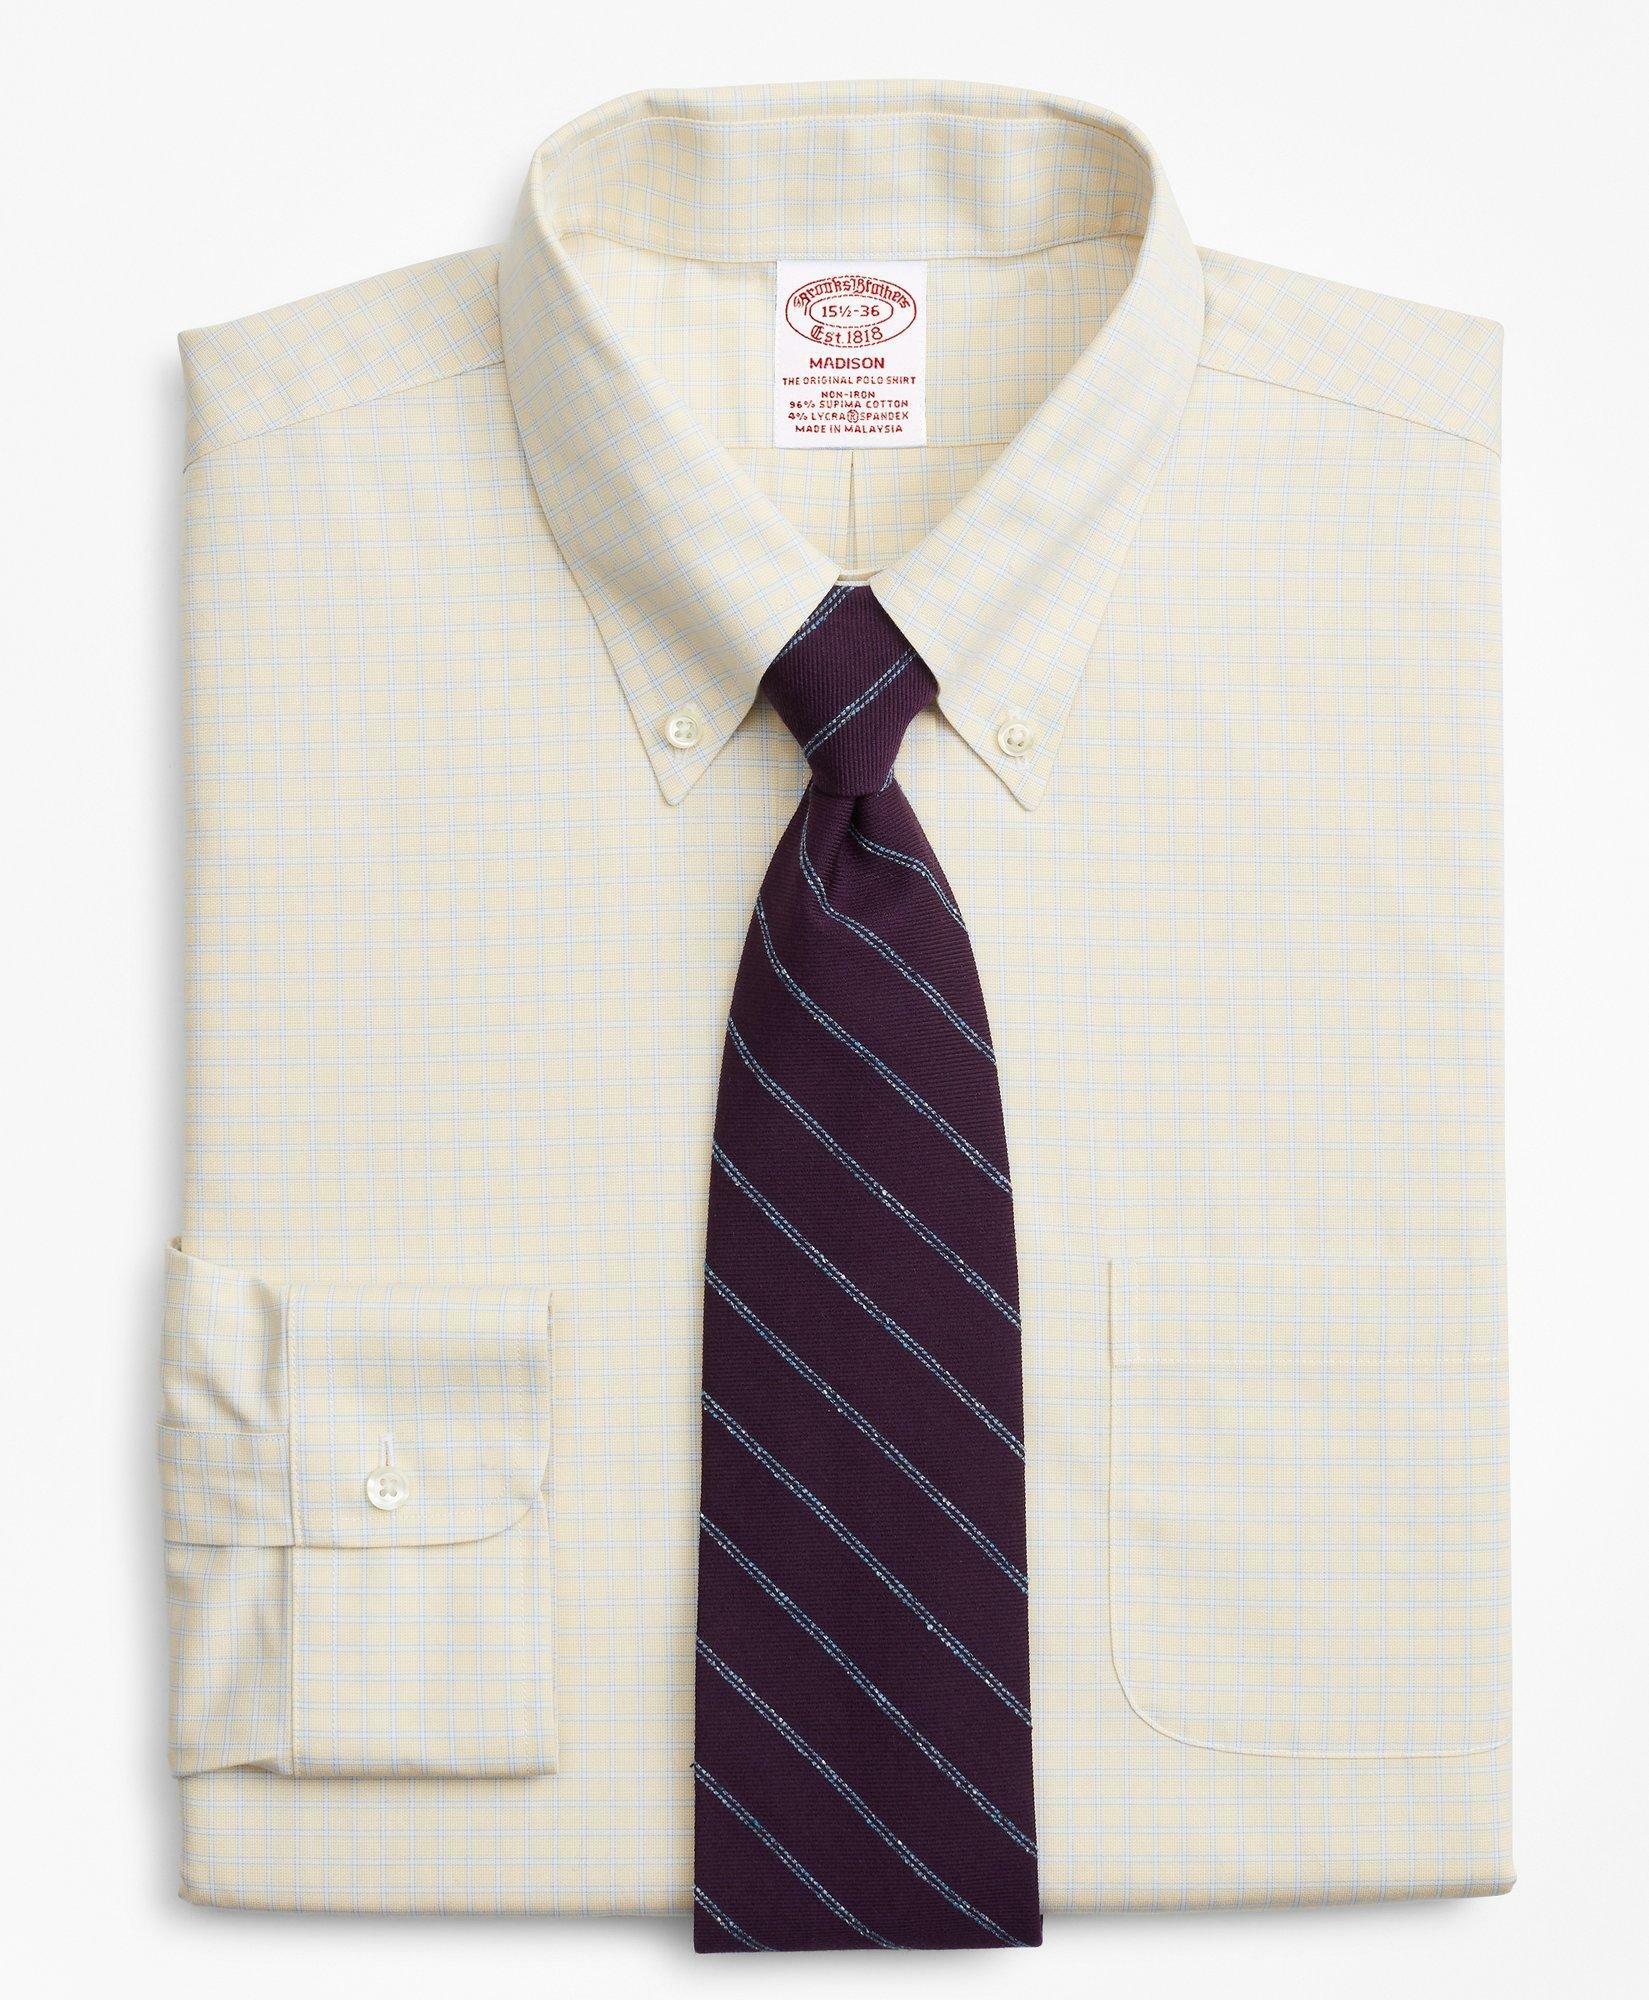 Brooks Brothers Men's Stretch Madison Relaxed-Fit Dress Shirt, Non-Iron Check | Golden Haze